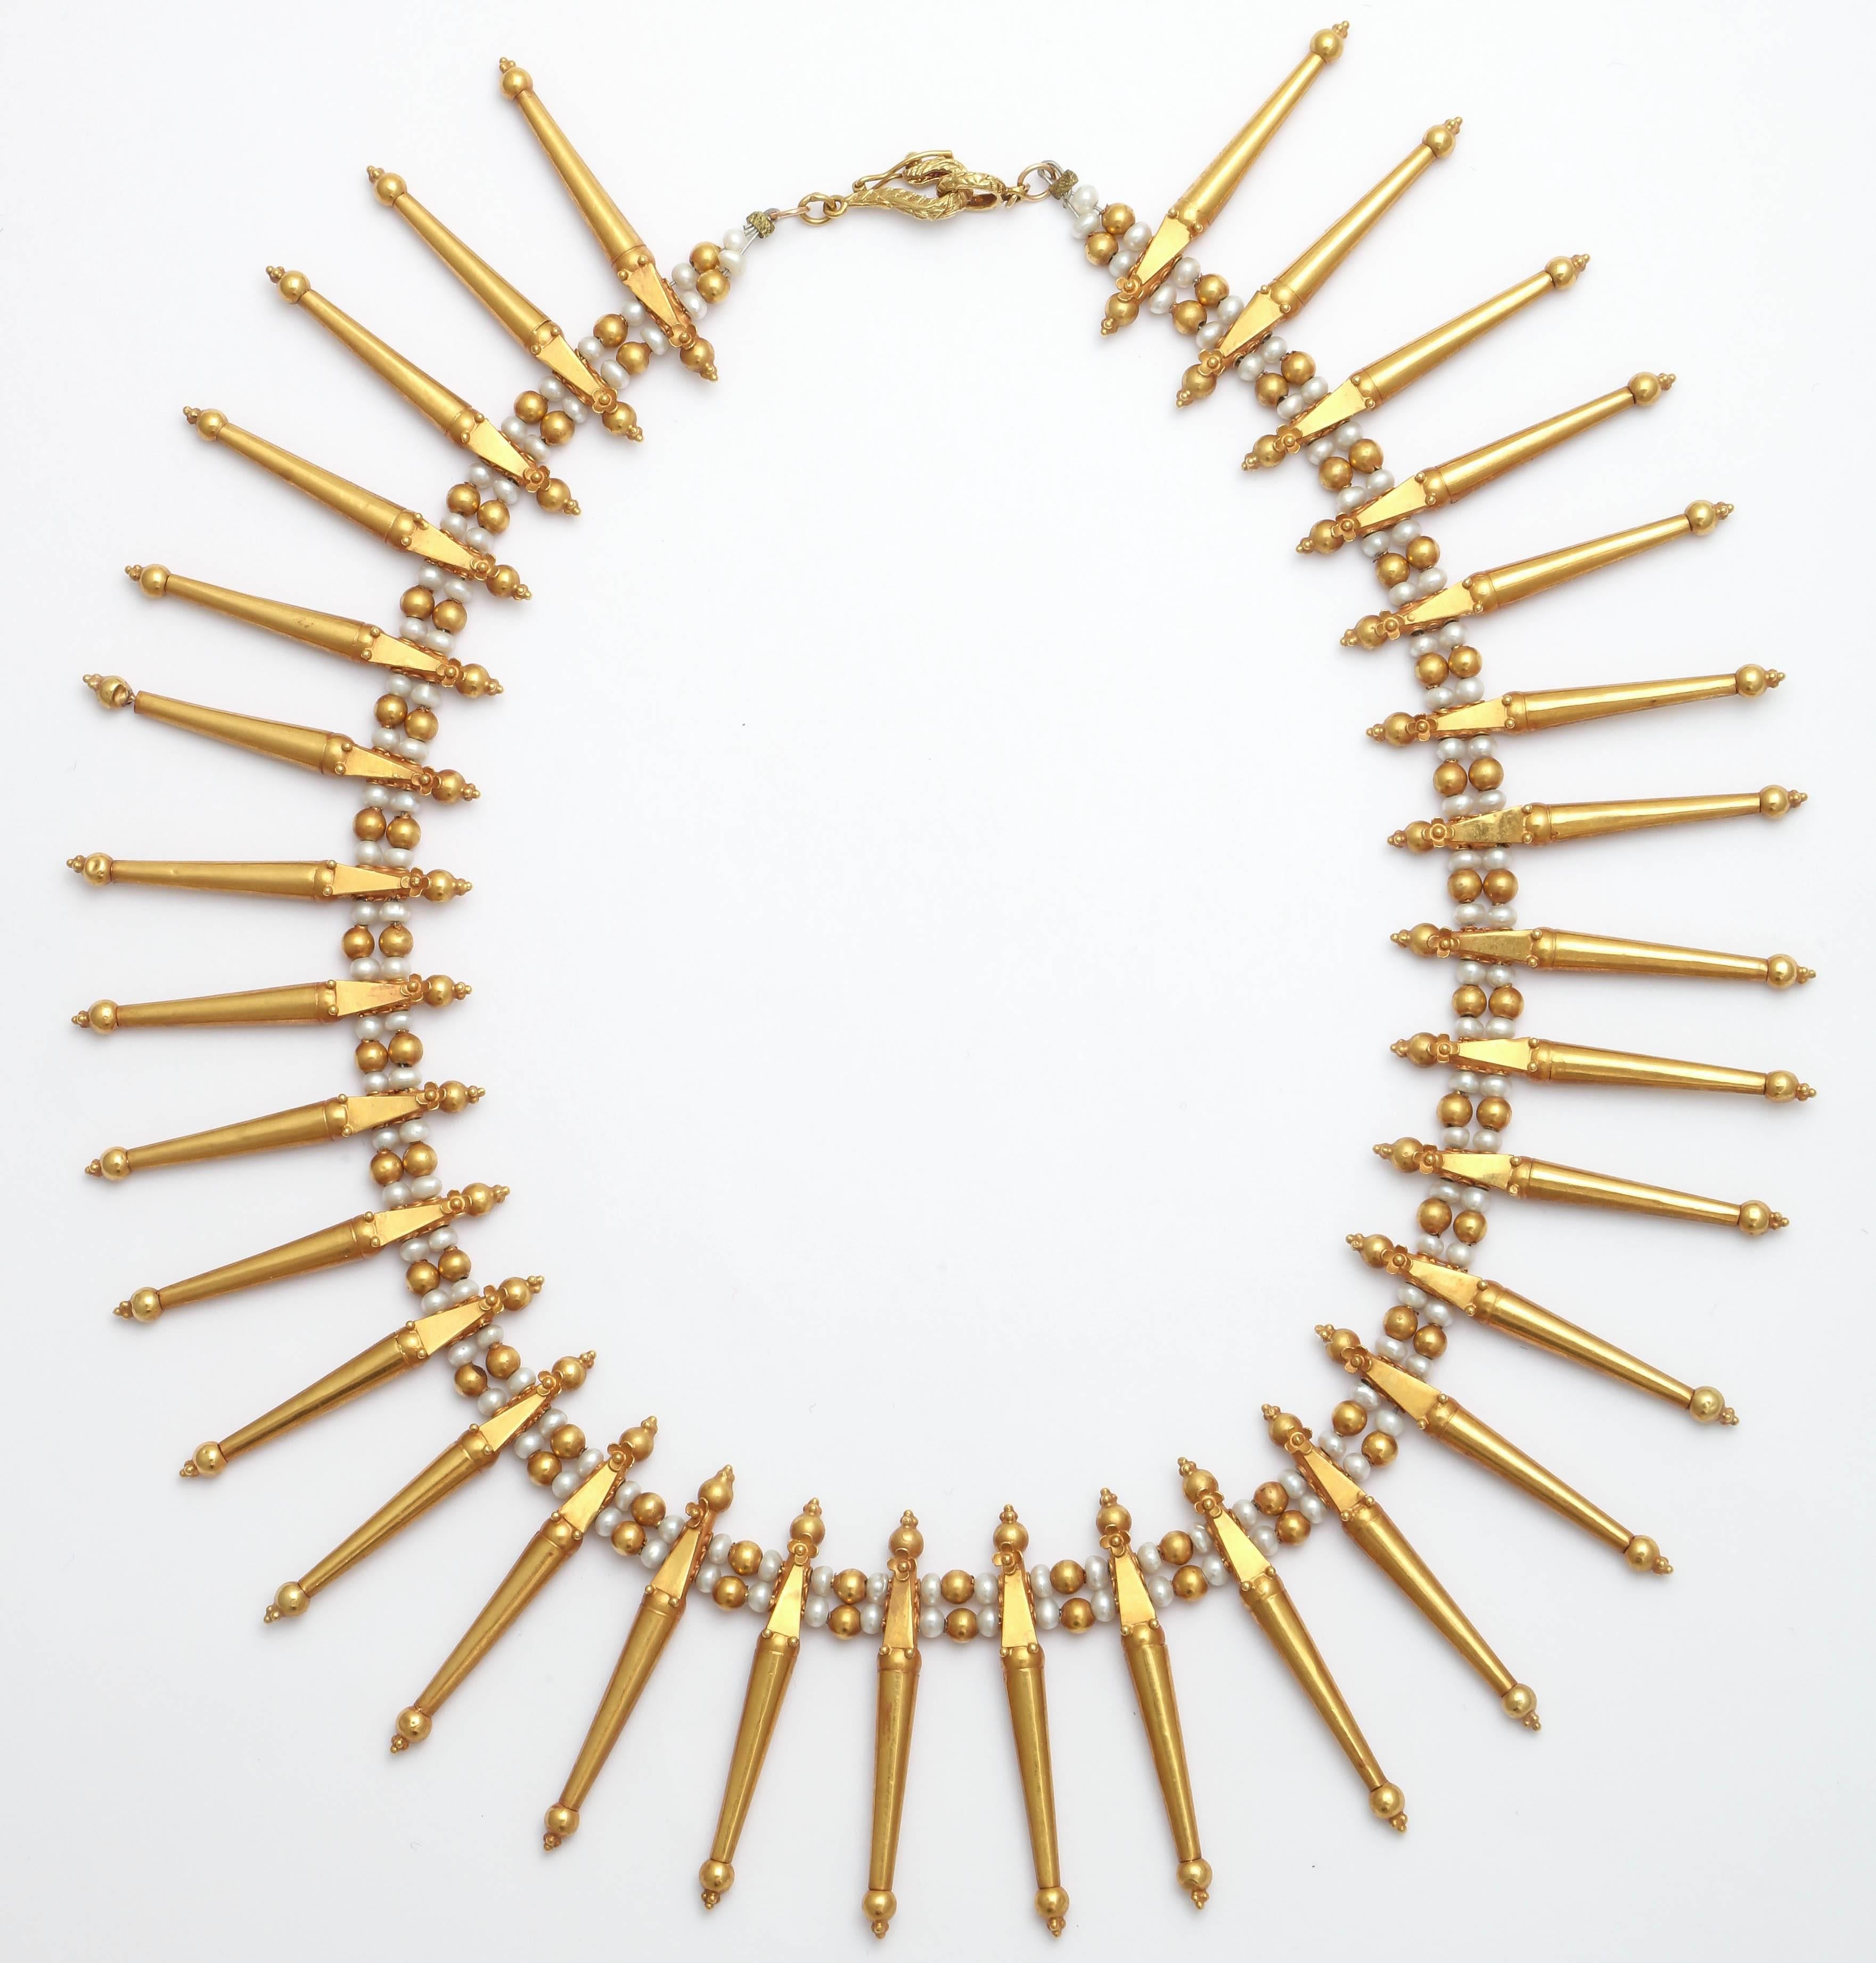 Classic and elegant Grecian style fringe necklace. The necklace has 32 'spike' components in 18 Kt gold separated by fresh water pearls and gold beads. Great for evening  wear with a toga dress or under a white shirt with your favorite jeans. The